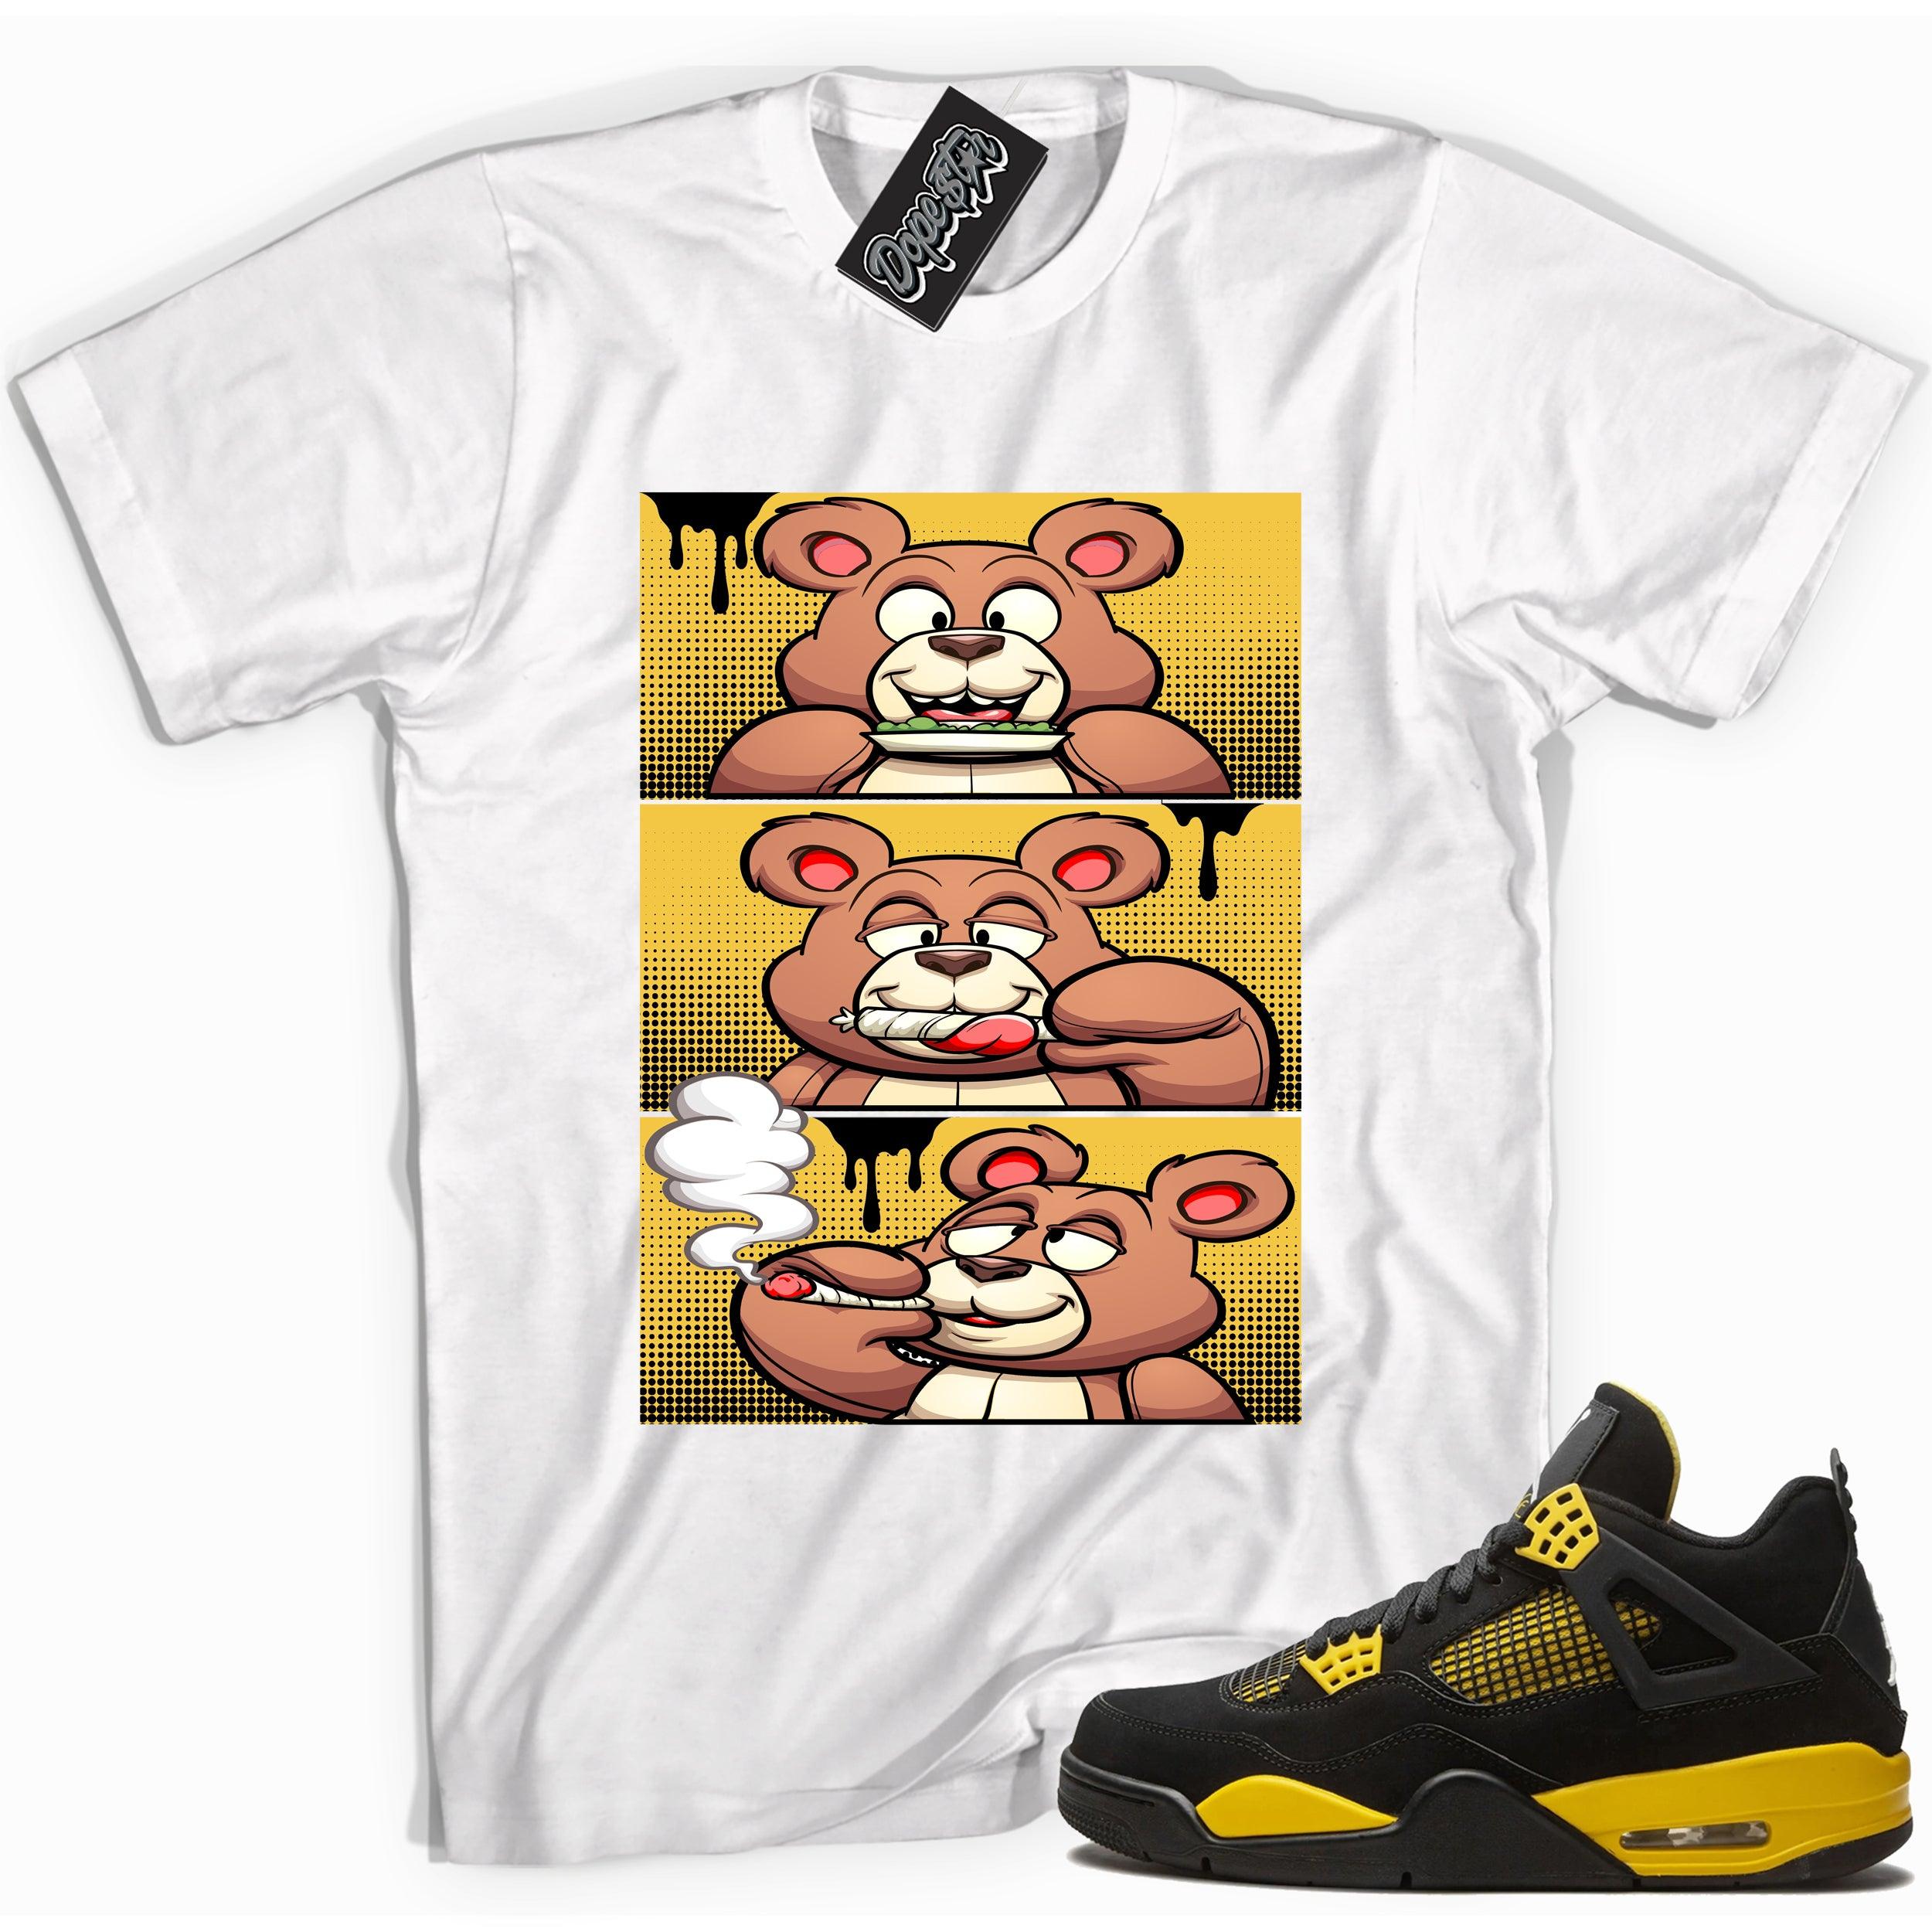 Cool white graphic tee with 'roll it lick it smoke it' print, that perfectly matches Air Jordan 4 Thunder sneakers